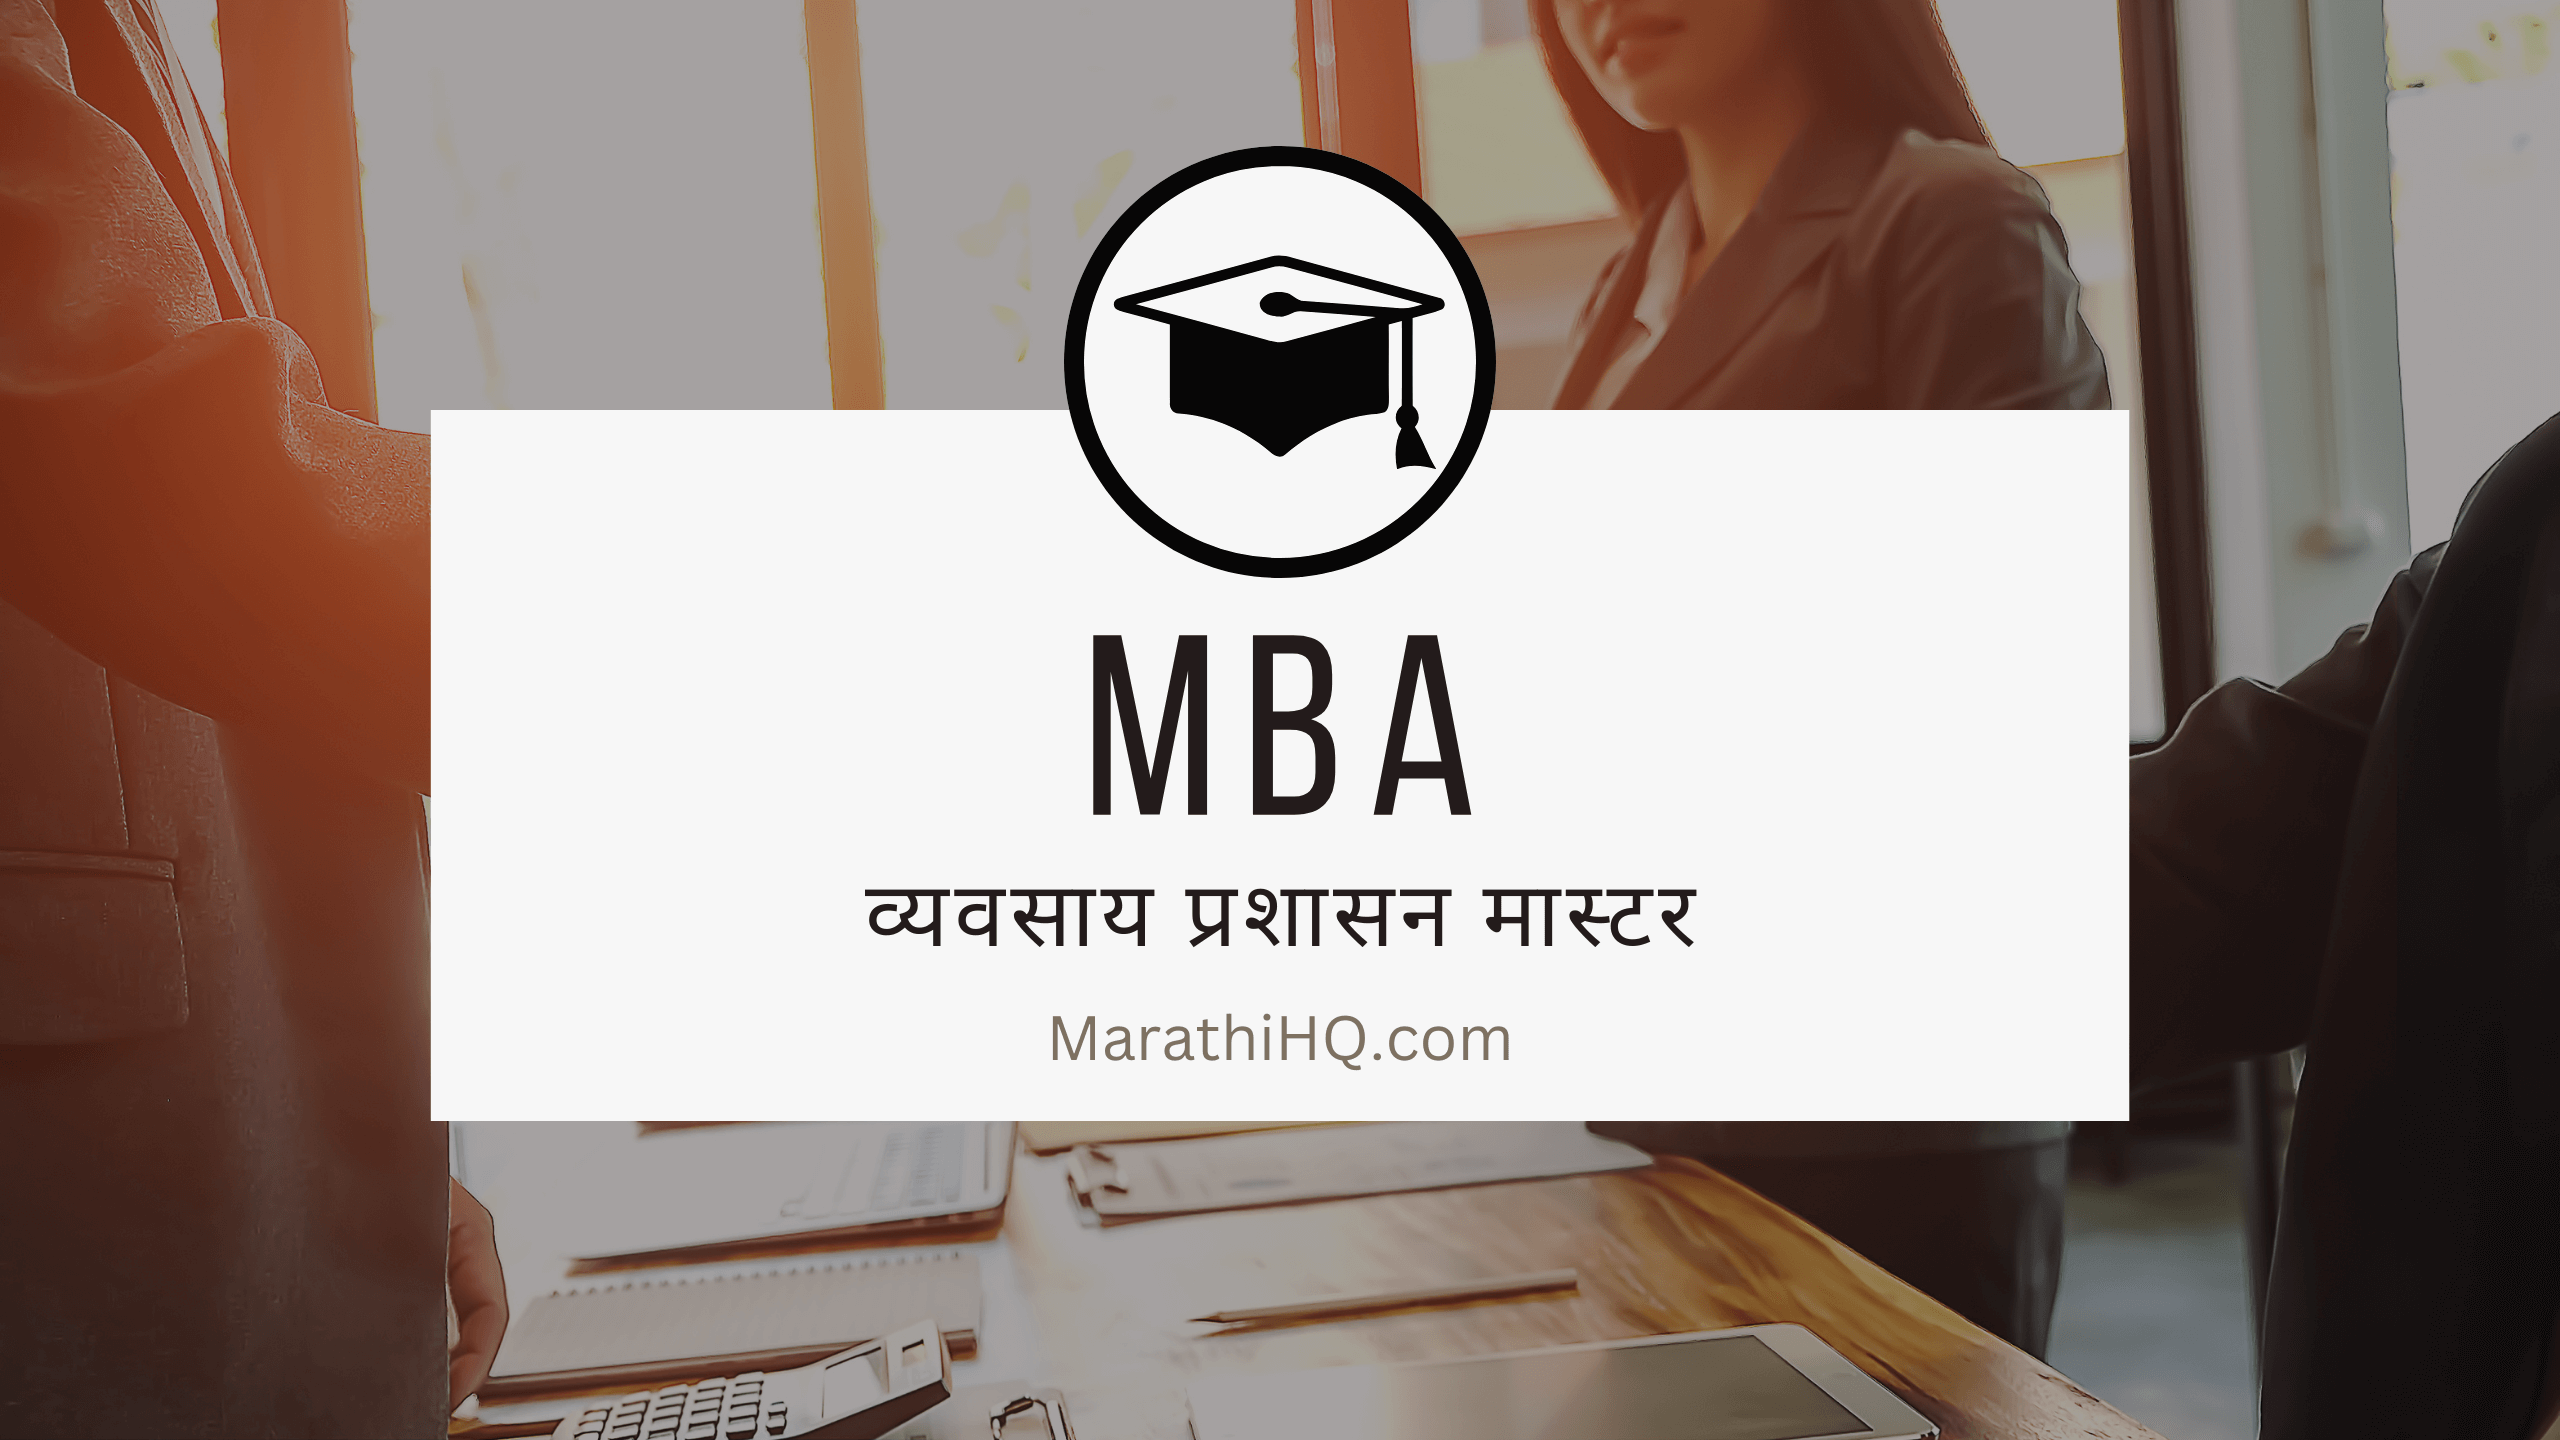 Read more about the article MBA GUIDE – फी, पात्रता, प्रवेश परीक्षा, अभ्यासक्रम, SUBJECTS, इ.